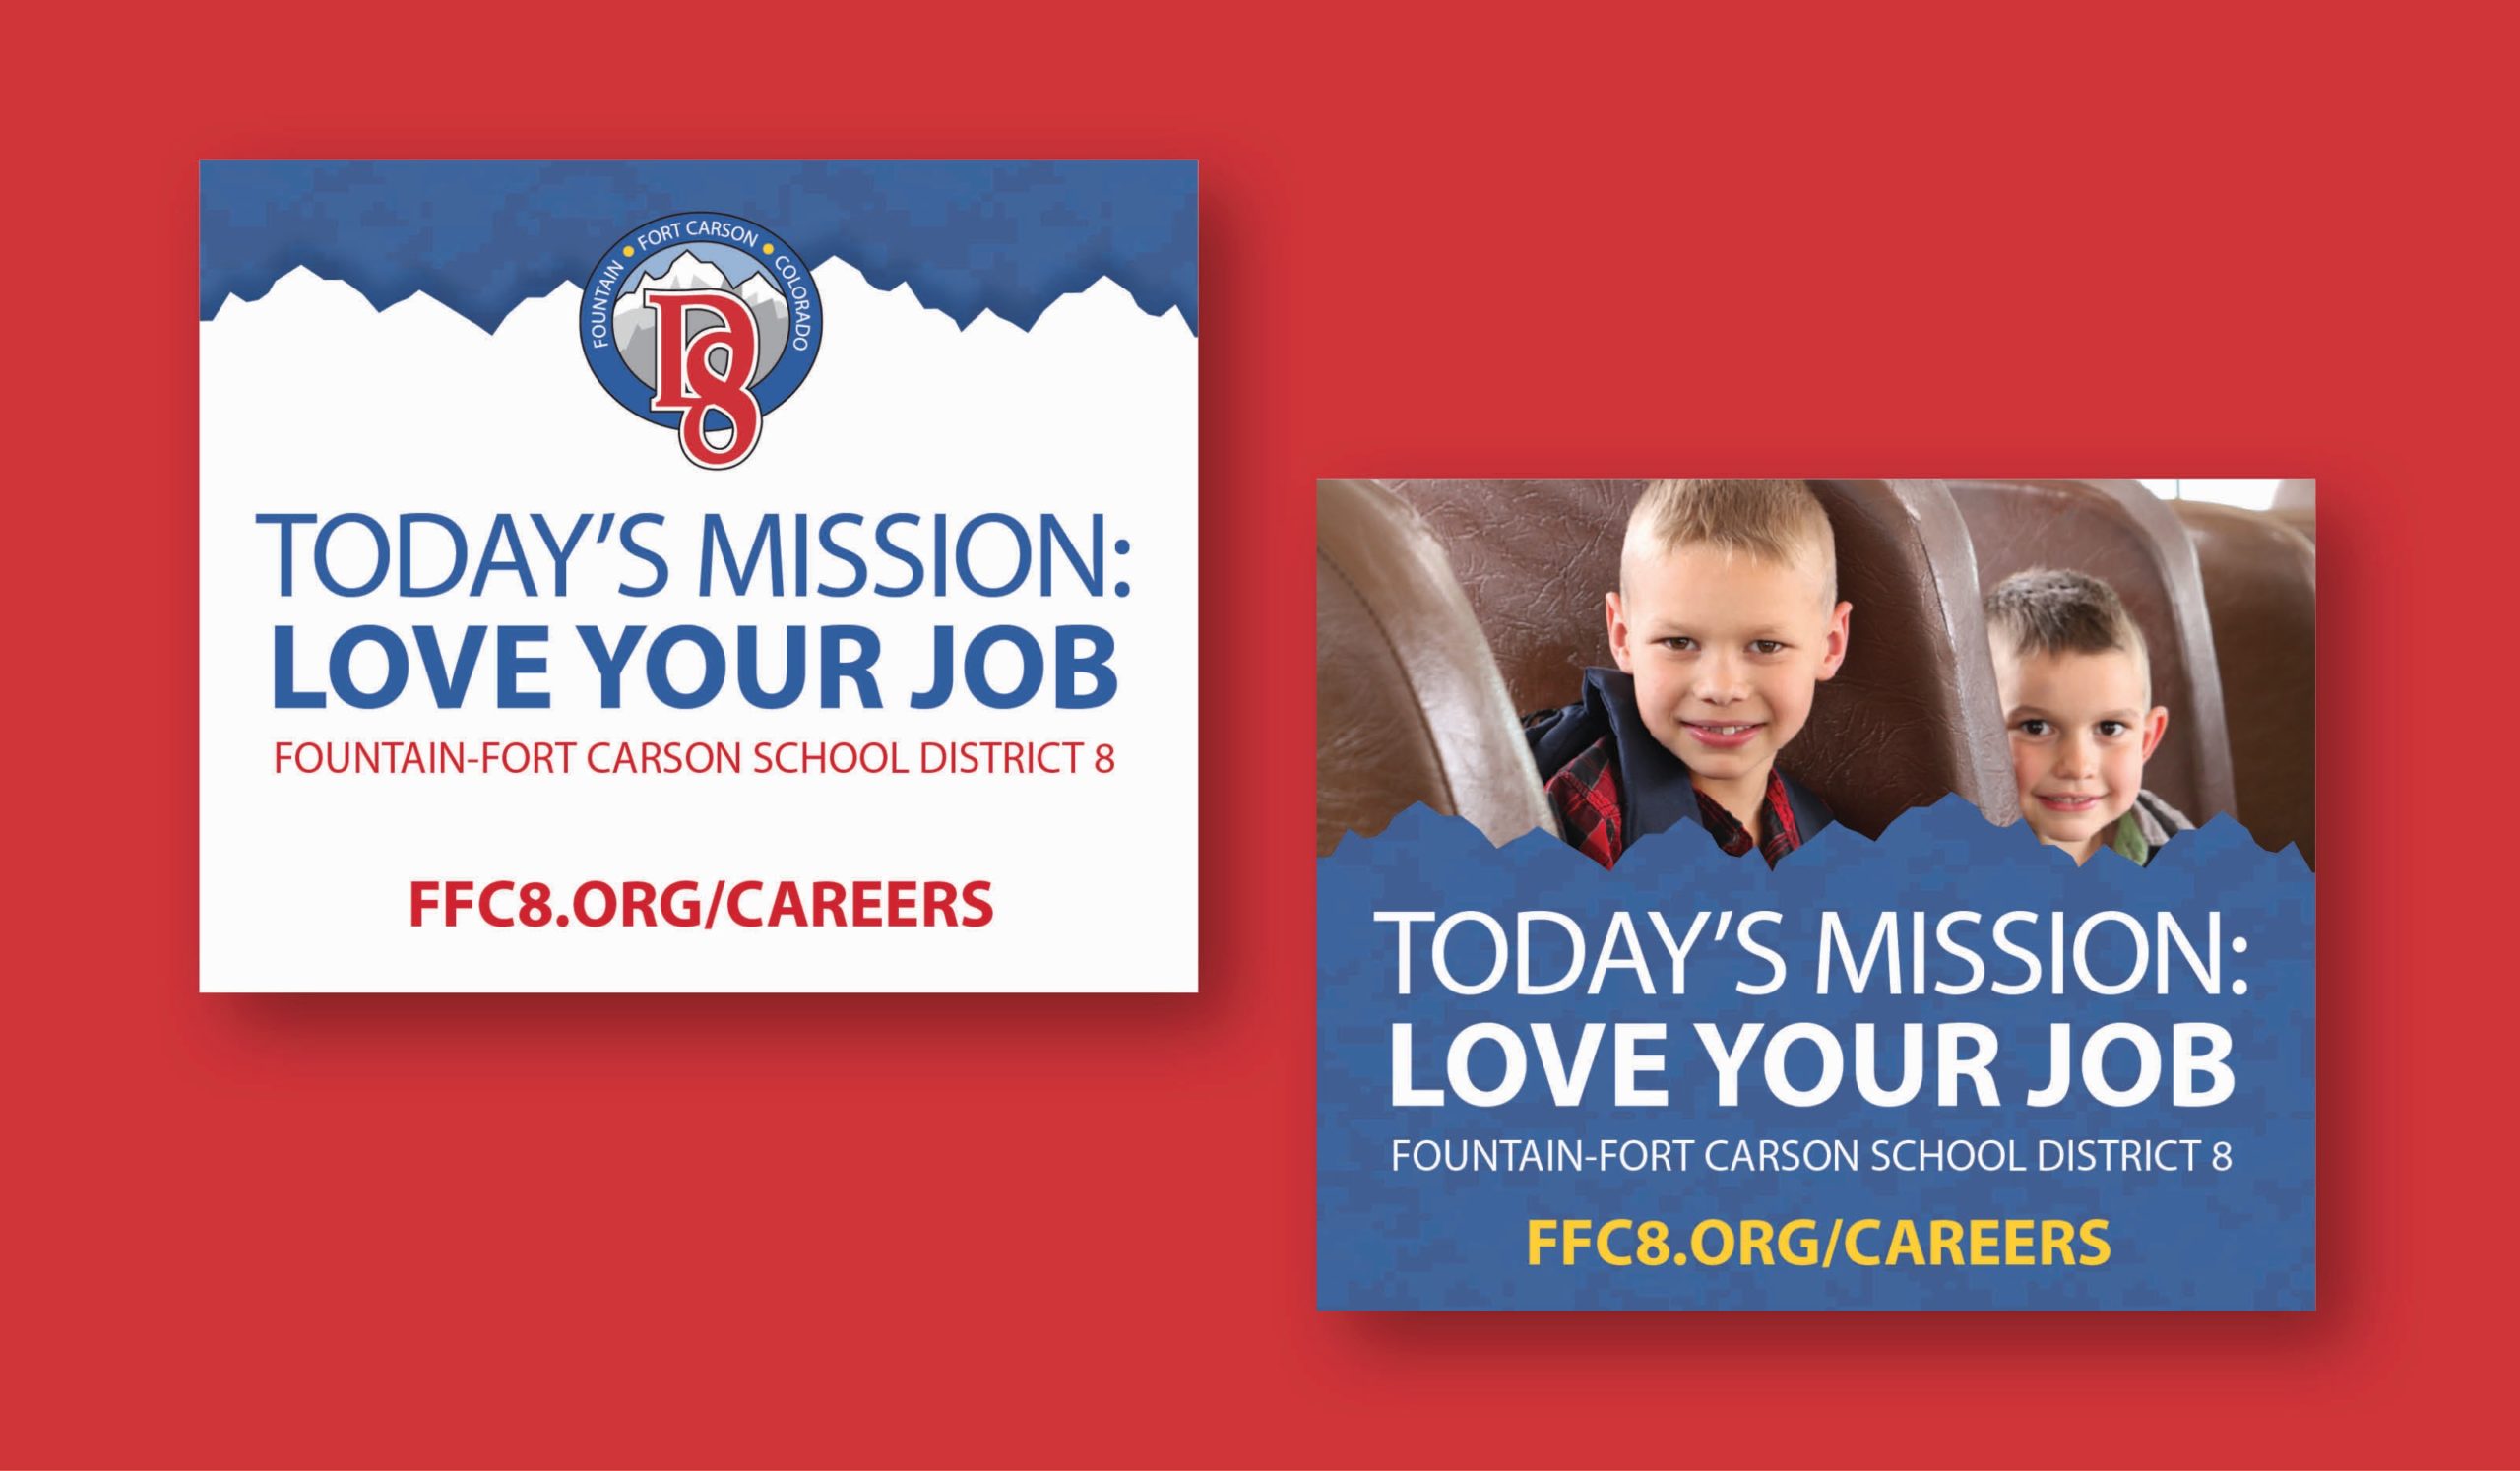 digital ads for today's mission love your job ffc8.org/careers